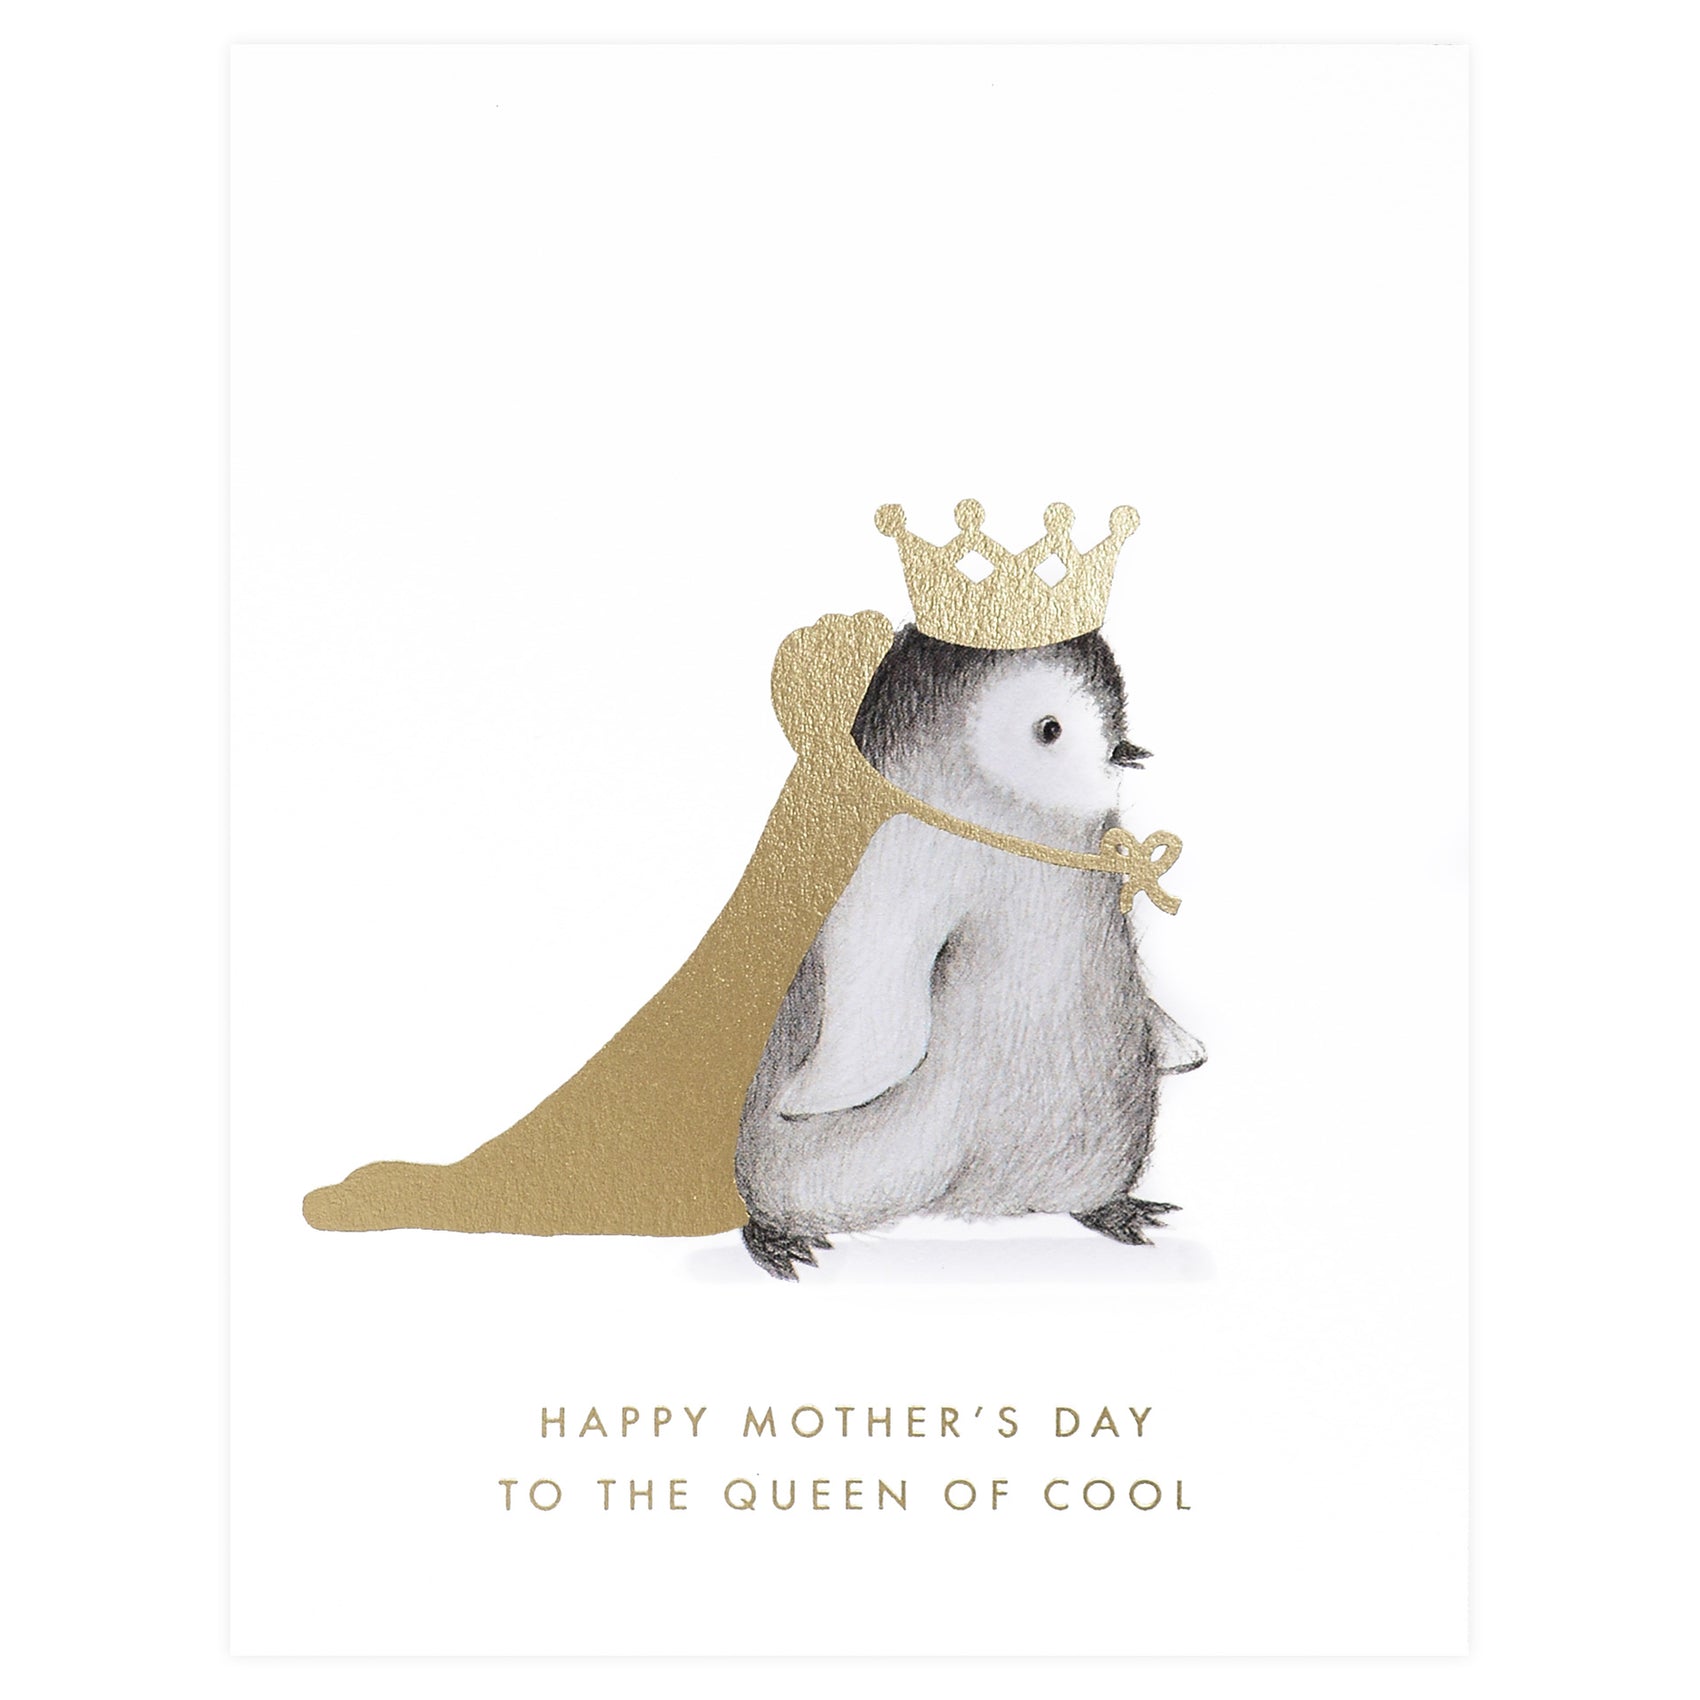 The Queen of Cool Mother's Day Card